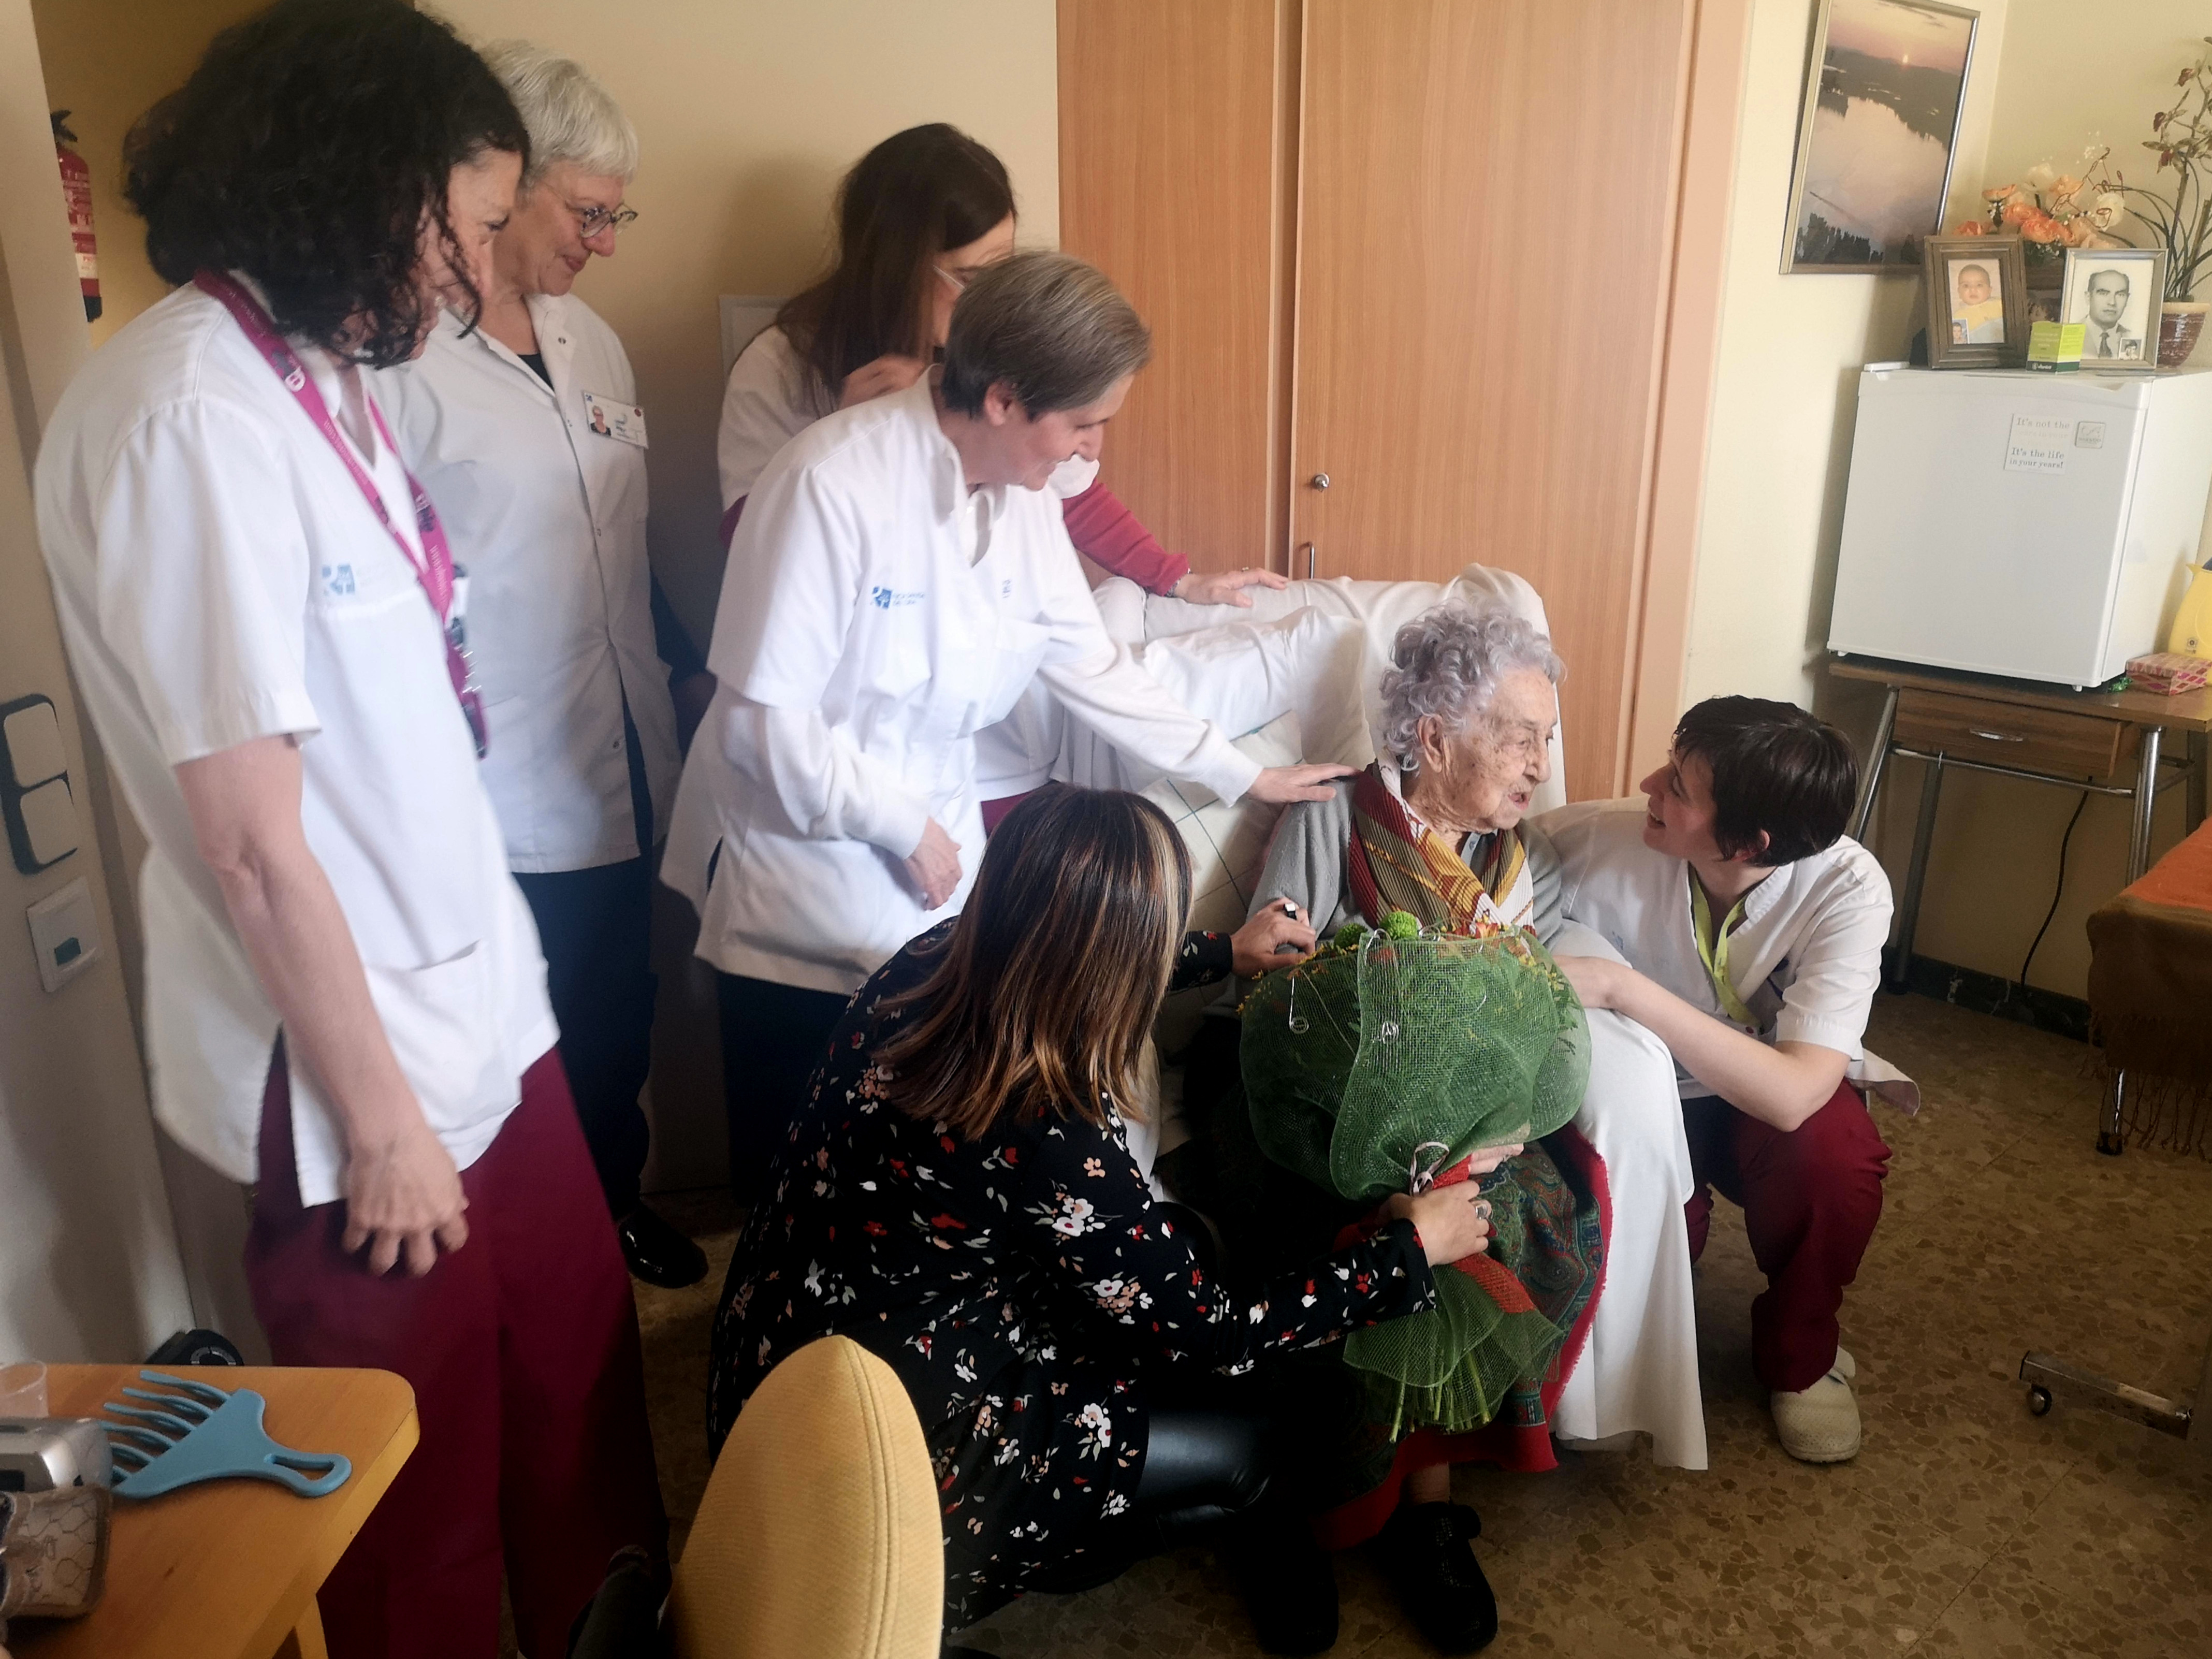 Maria Branyas holding a bouquet of flowers in the Residència Santa Maria del Tura home care, in Olot, on March 4, 2020